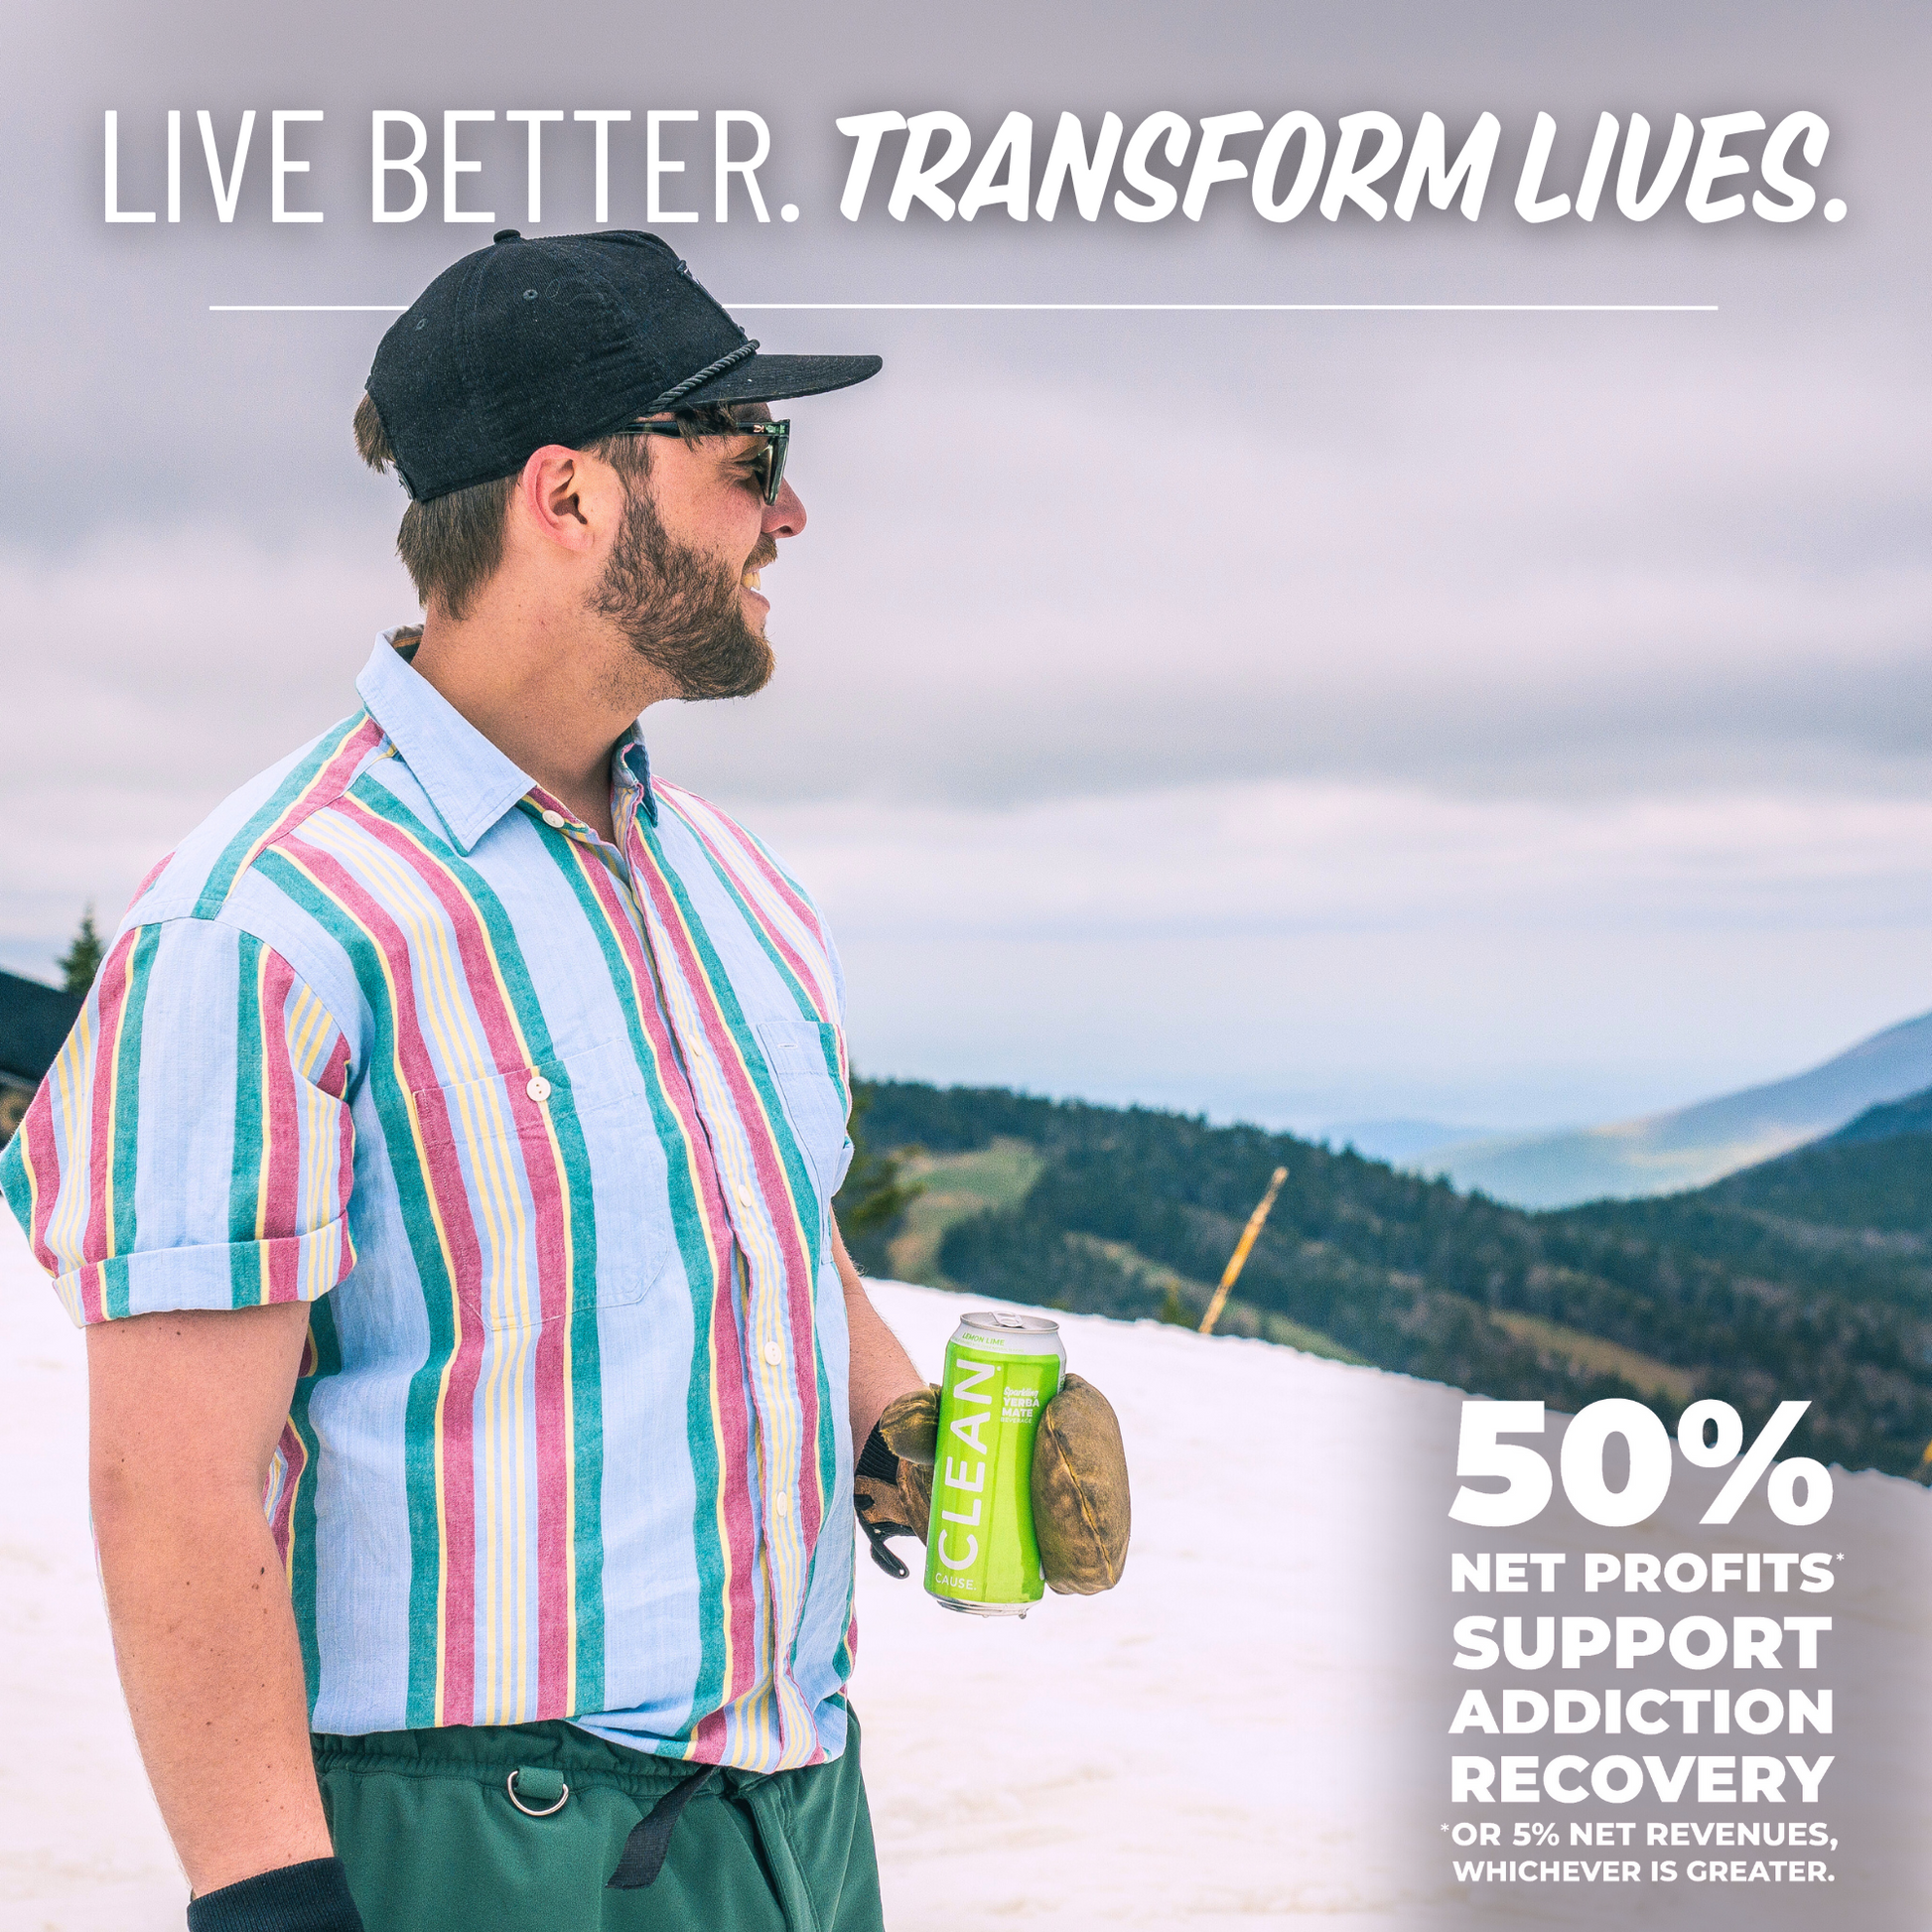 A man standing on a snowy hill holding a can of Lemon Lime CLEAN Cause with the slogan Live Better. Transform Lives. above her and 50% Net profits* support addiction recovery *or 5% net revenues, whichever is greater